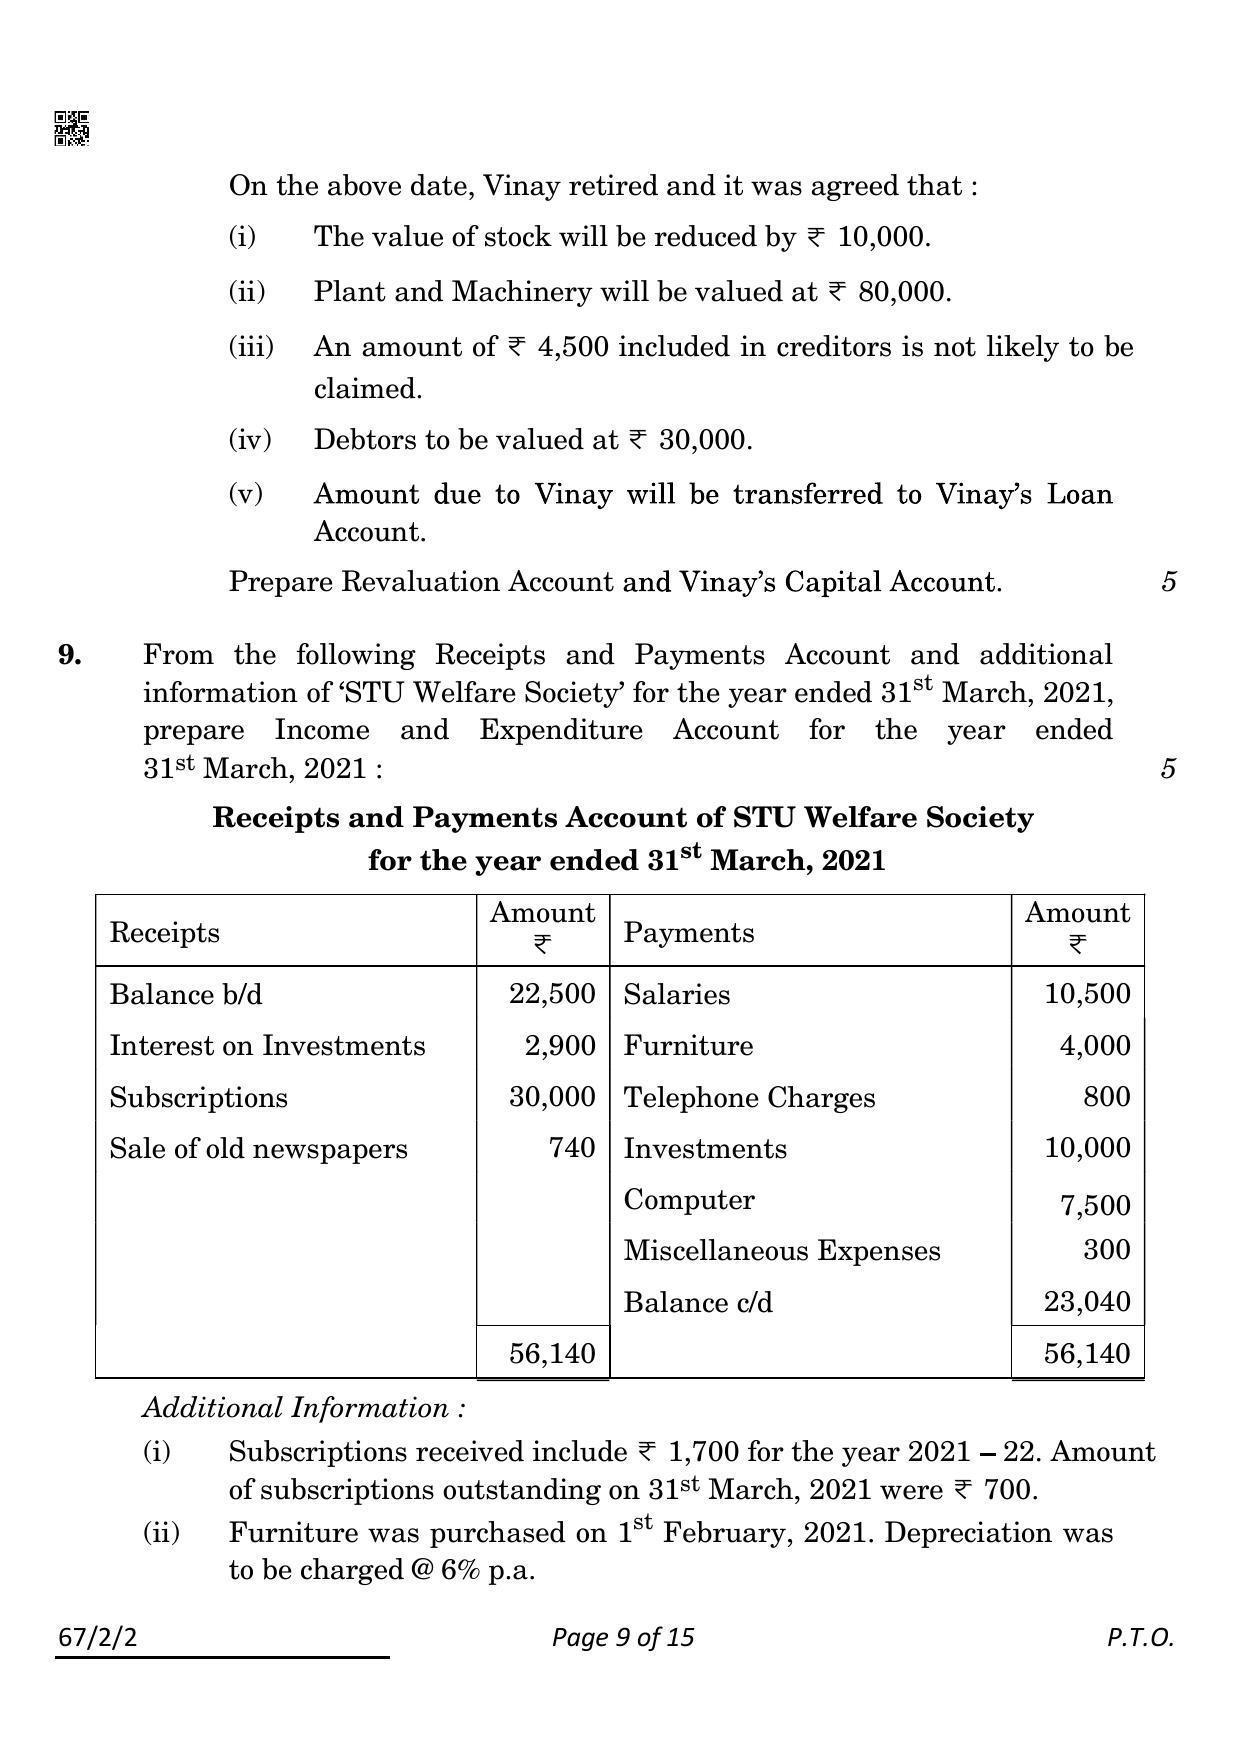 CBSE Class 12 67-2-2 Accountancy 2022 Question Paper - Page 9